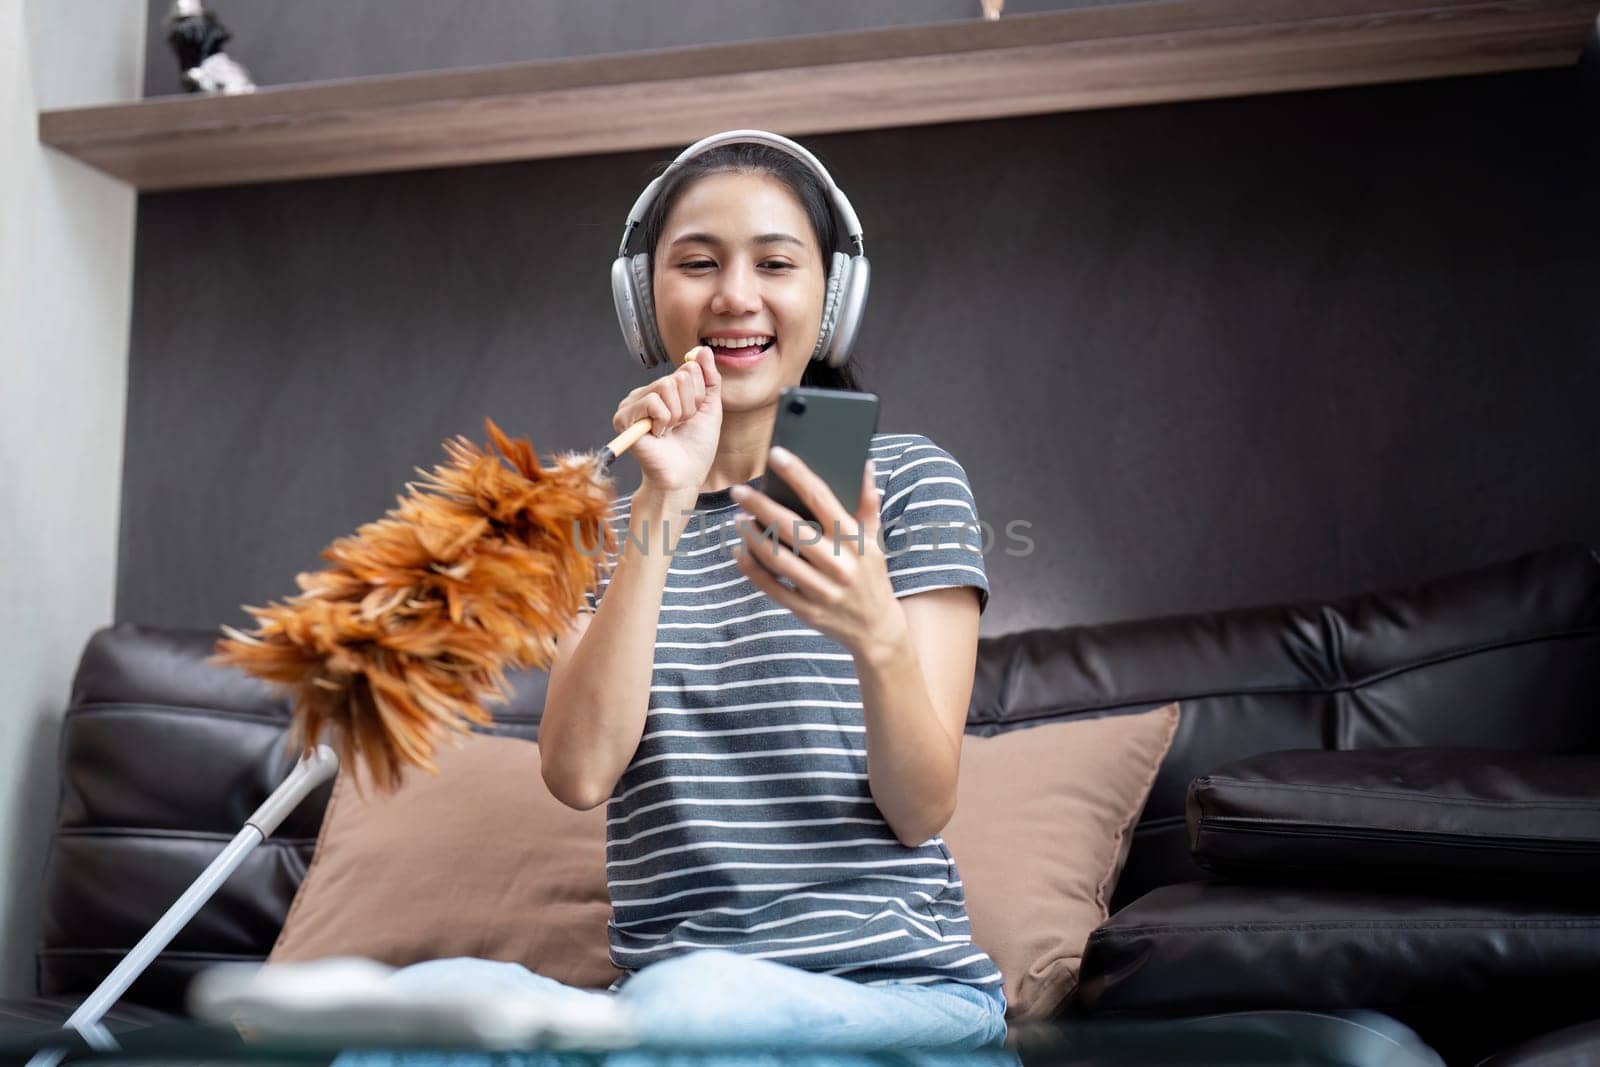 House cleaning with fun. Happy young asian housewife singing song during cleanup, using feather duster as microphone, enjoying domestic work. Young woman dancing and cleaning in living room.